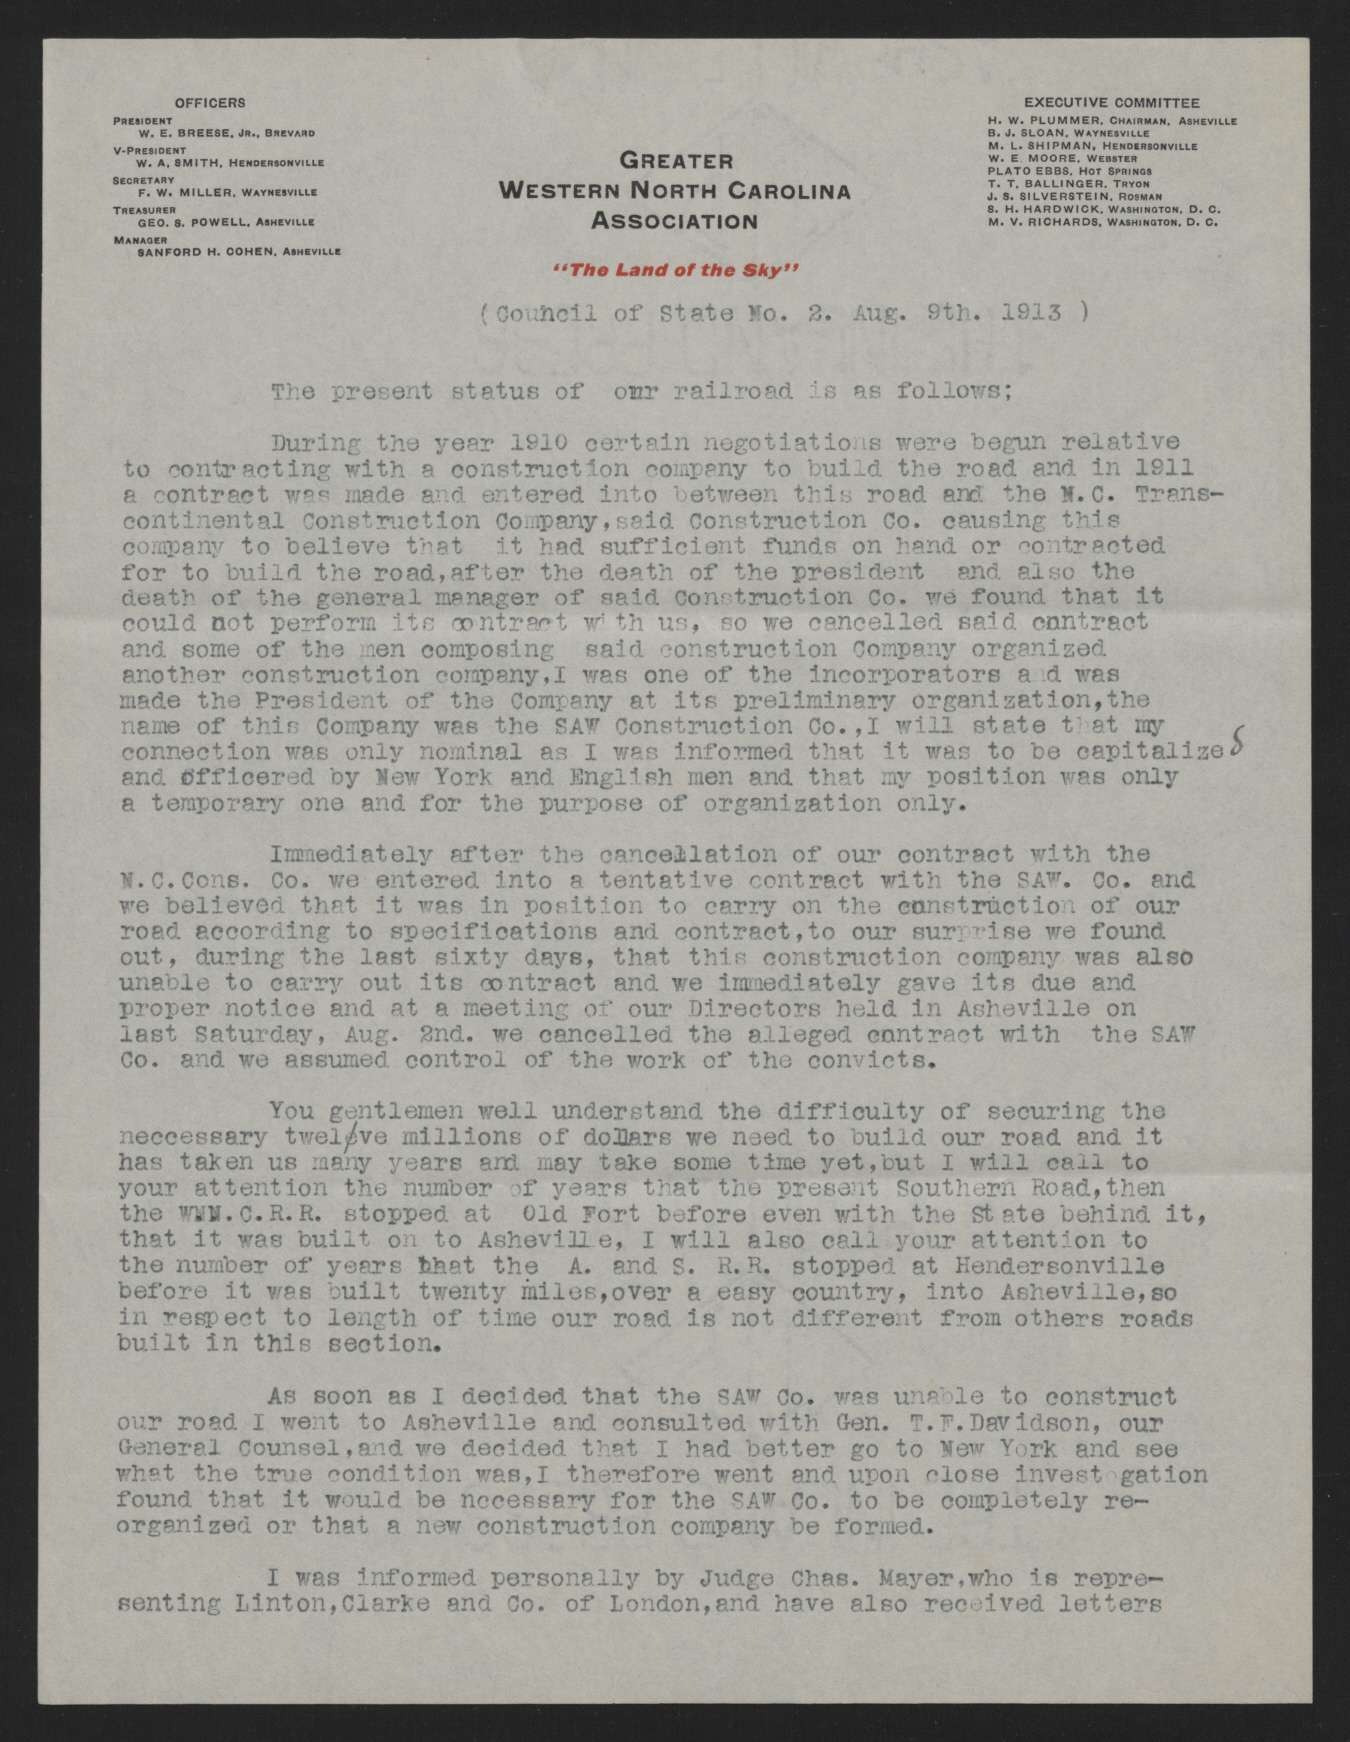 Letter from Breese to the Council of State, August 9, 1913, page 2